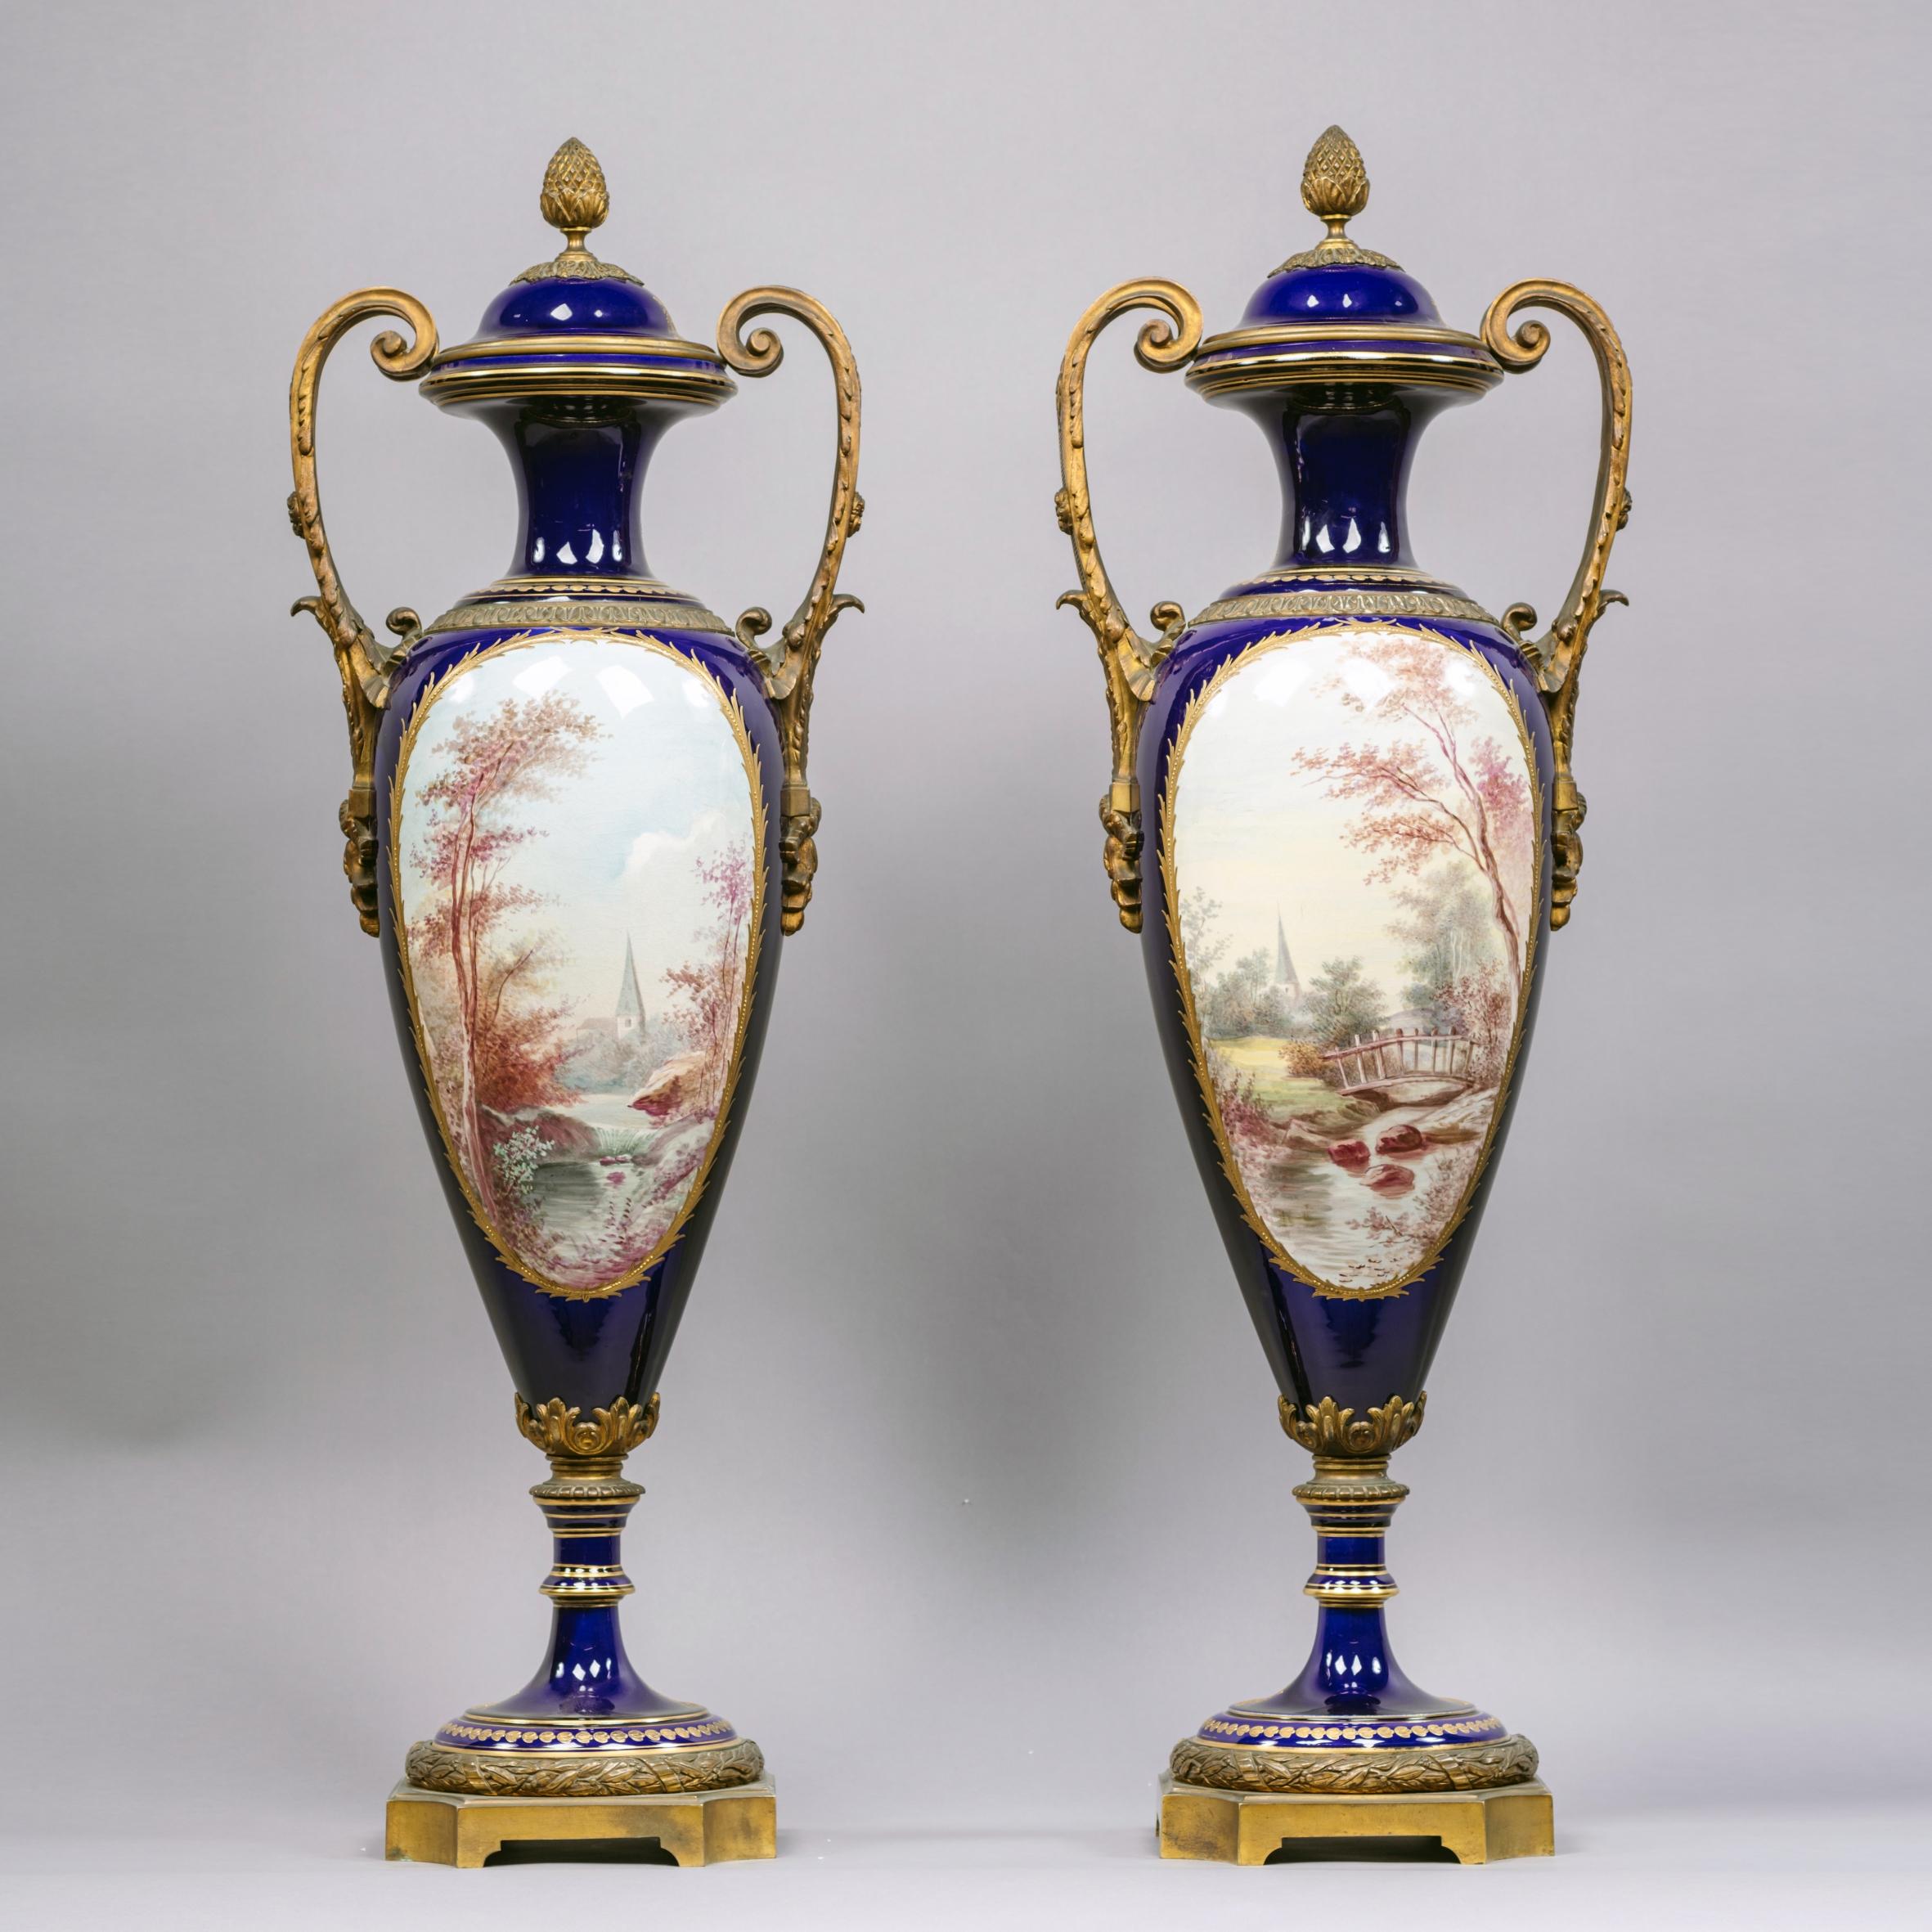 French Pair of Gilt-Bronze Sèvres Style Porcelain Vases and Covers For Sale